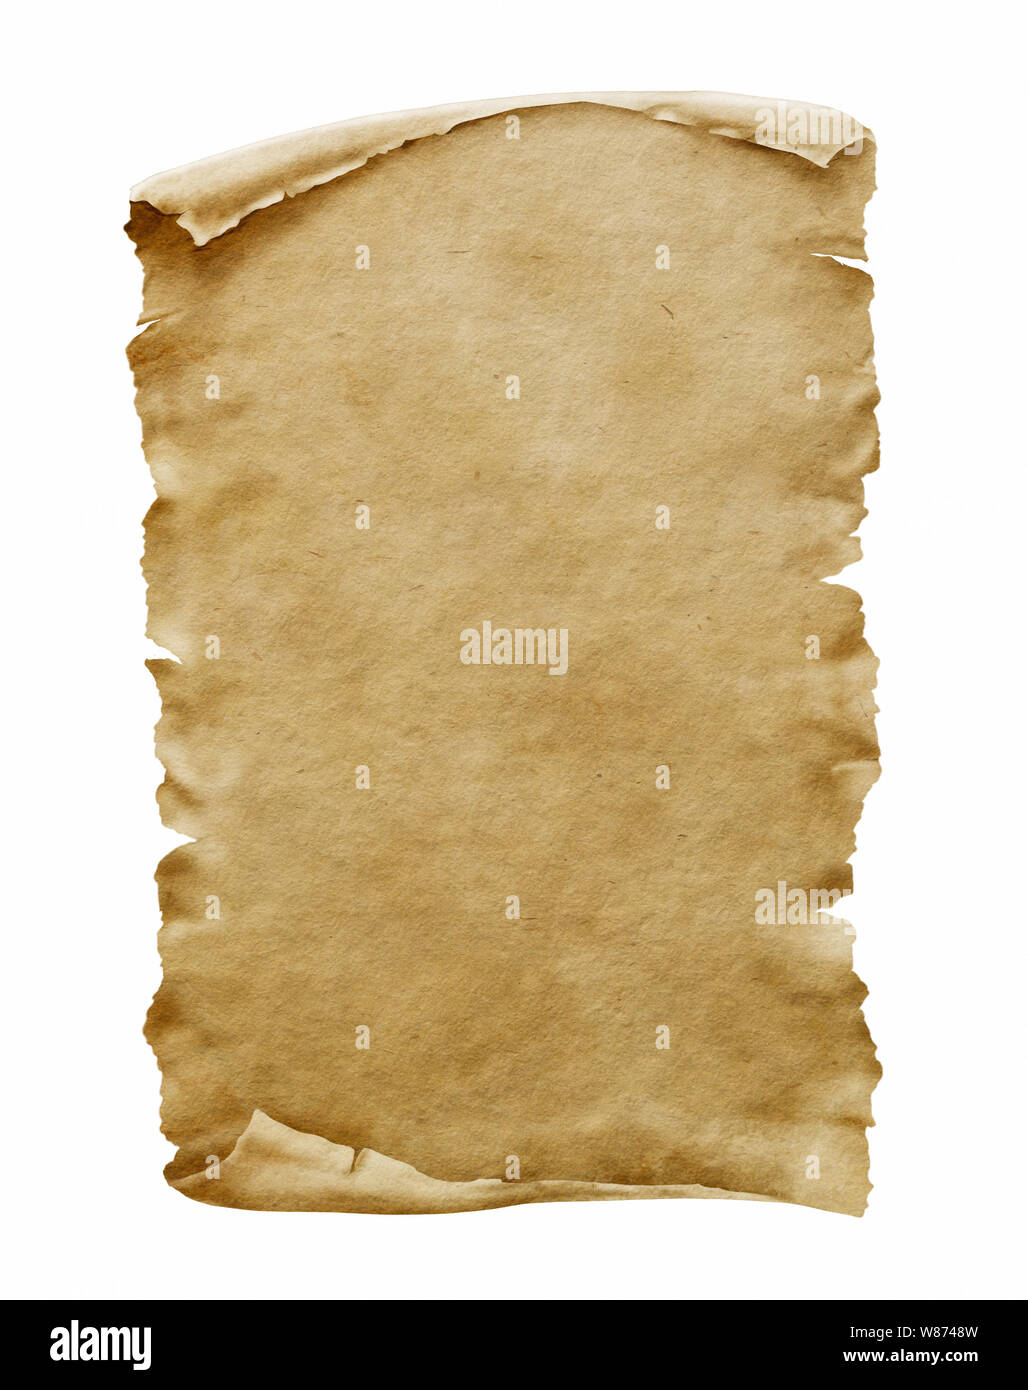 Old paper manuscript or papyrus scroll vertically oriented Stock Photo